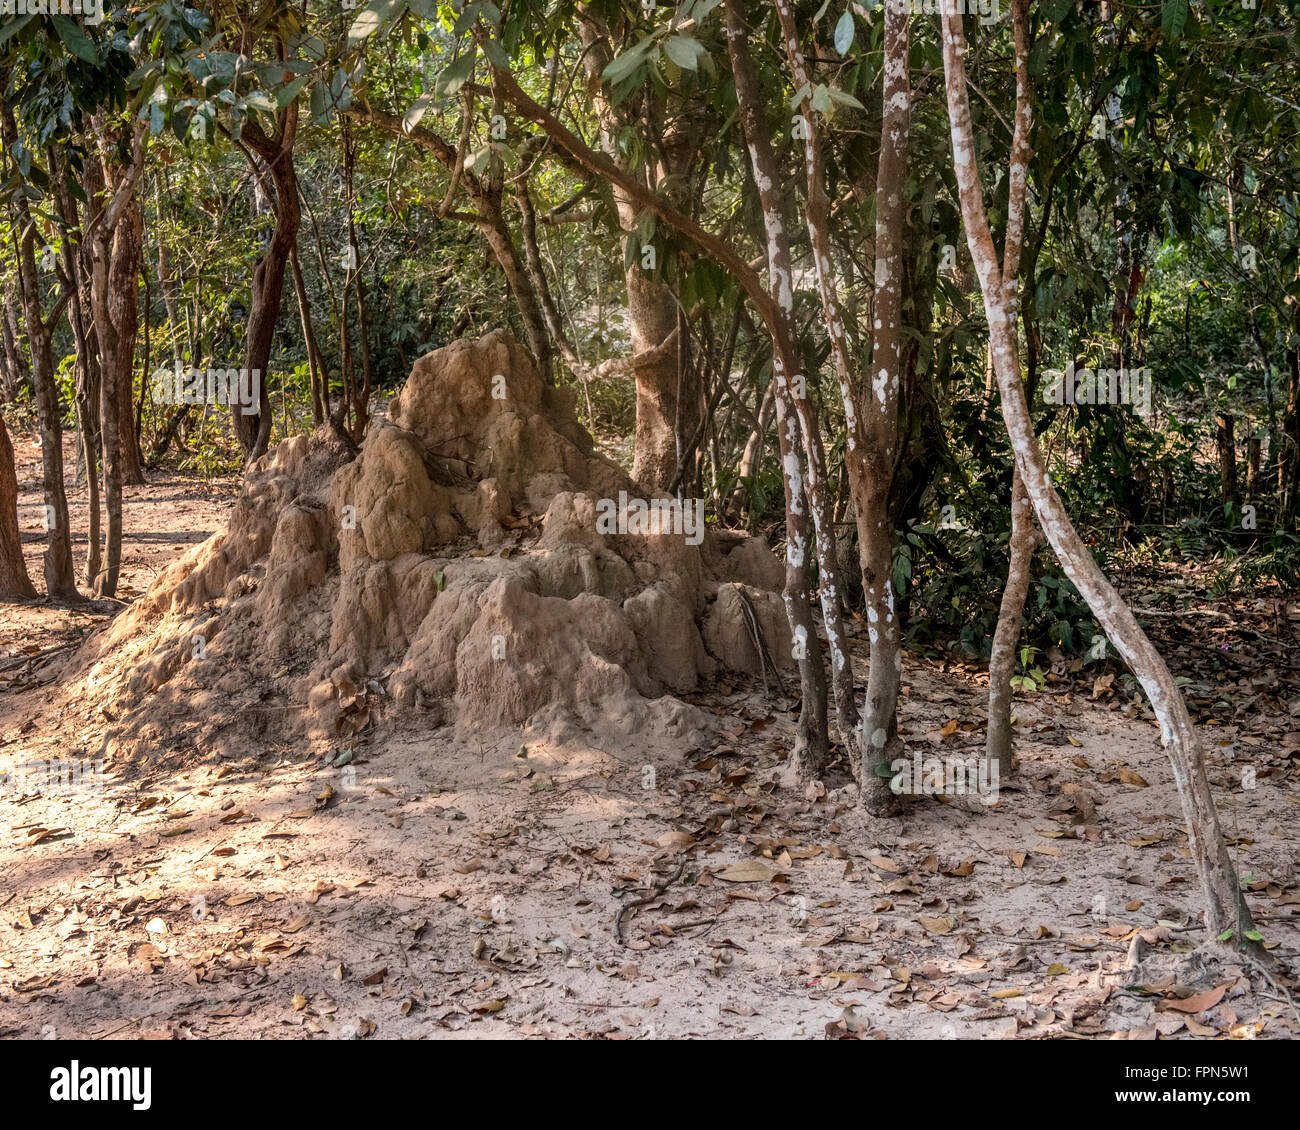 Termite mound, or anthill, probably the common Hypotermes makhamensis, in the tropical forest of Angkhor, Cambodia Stock Photo